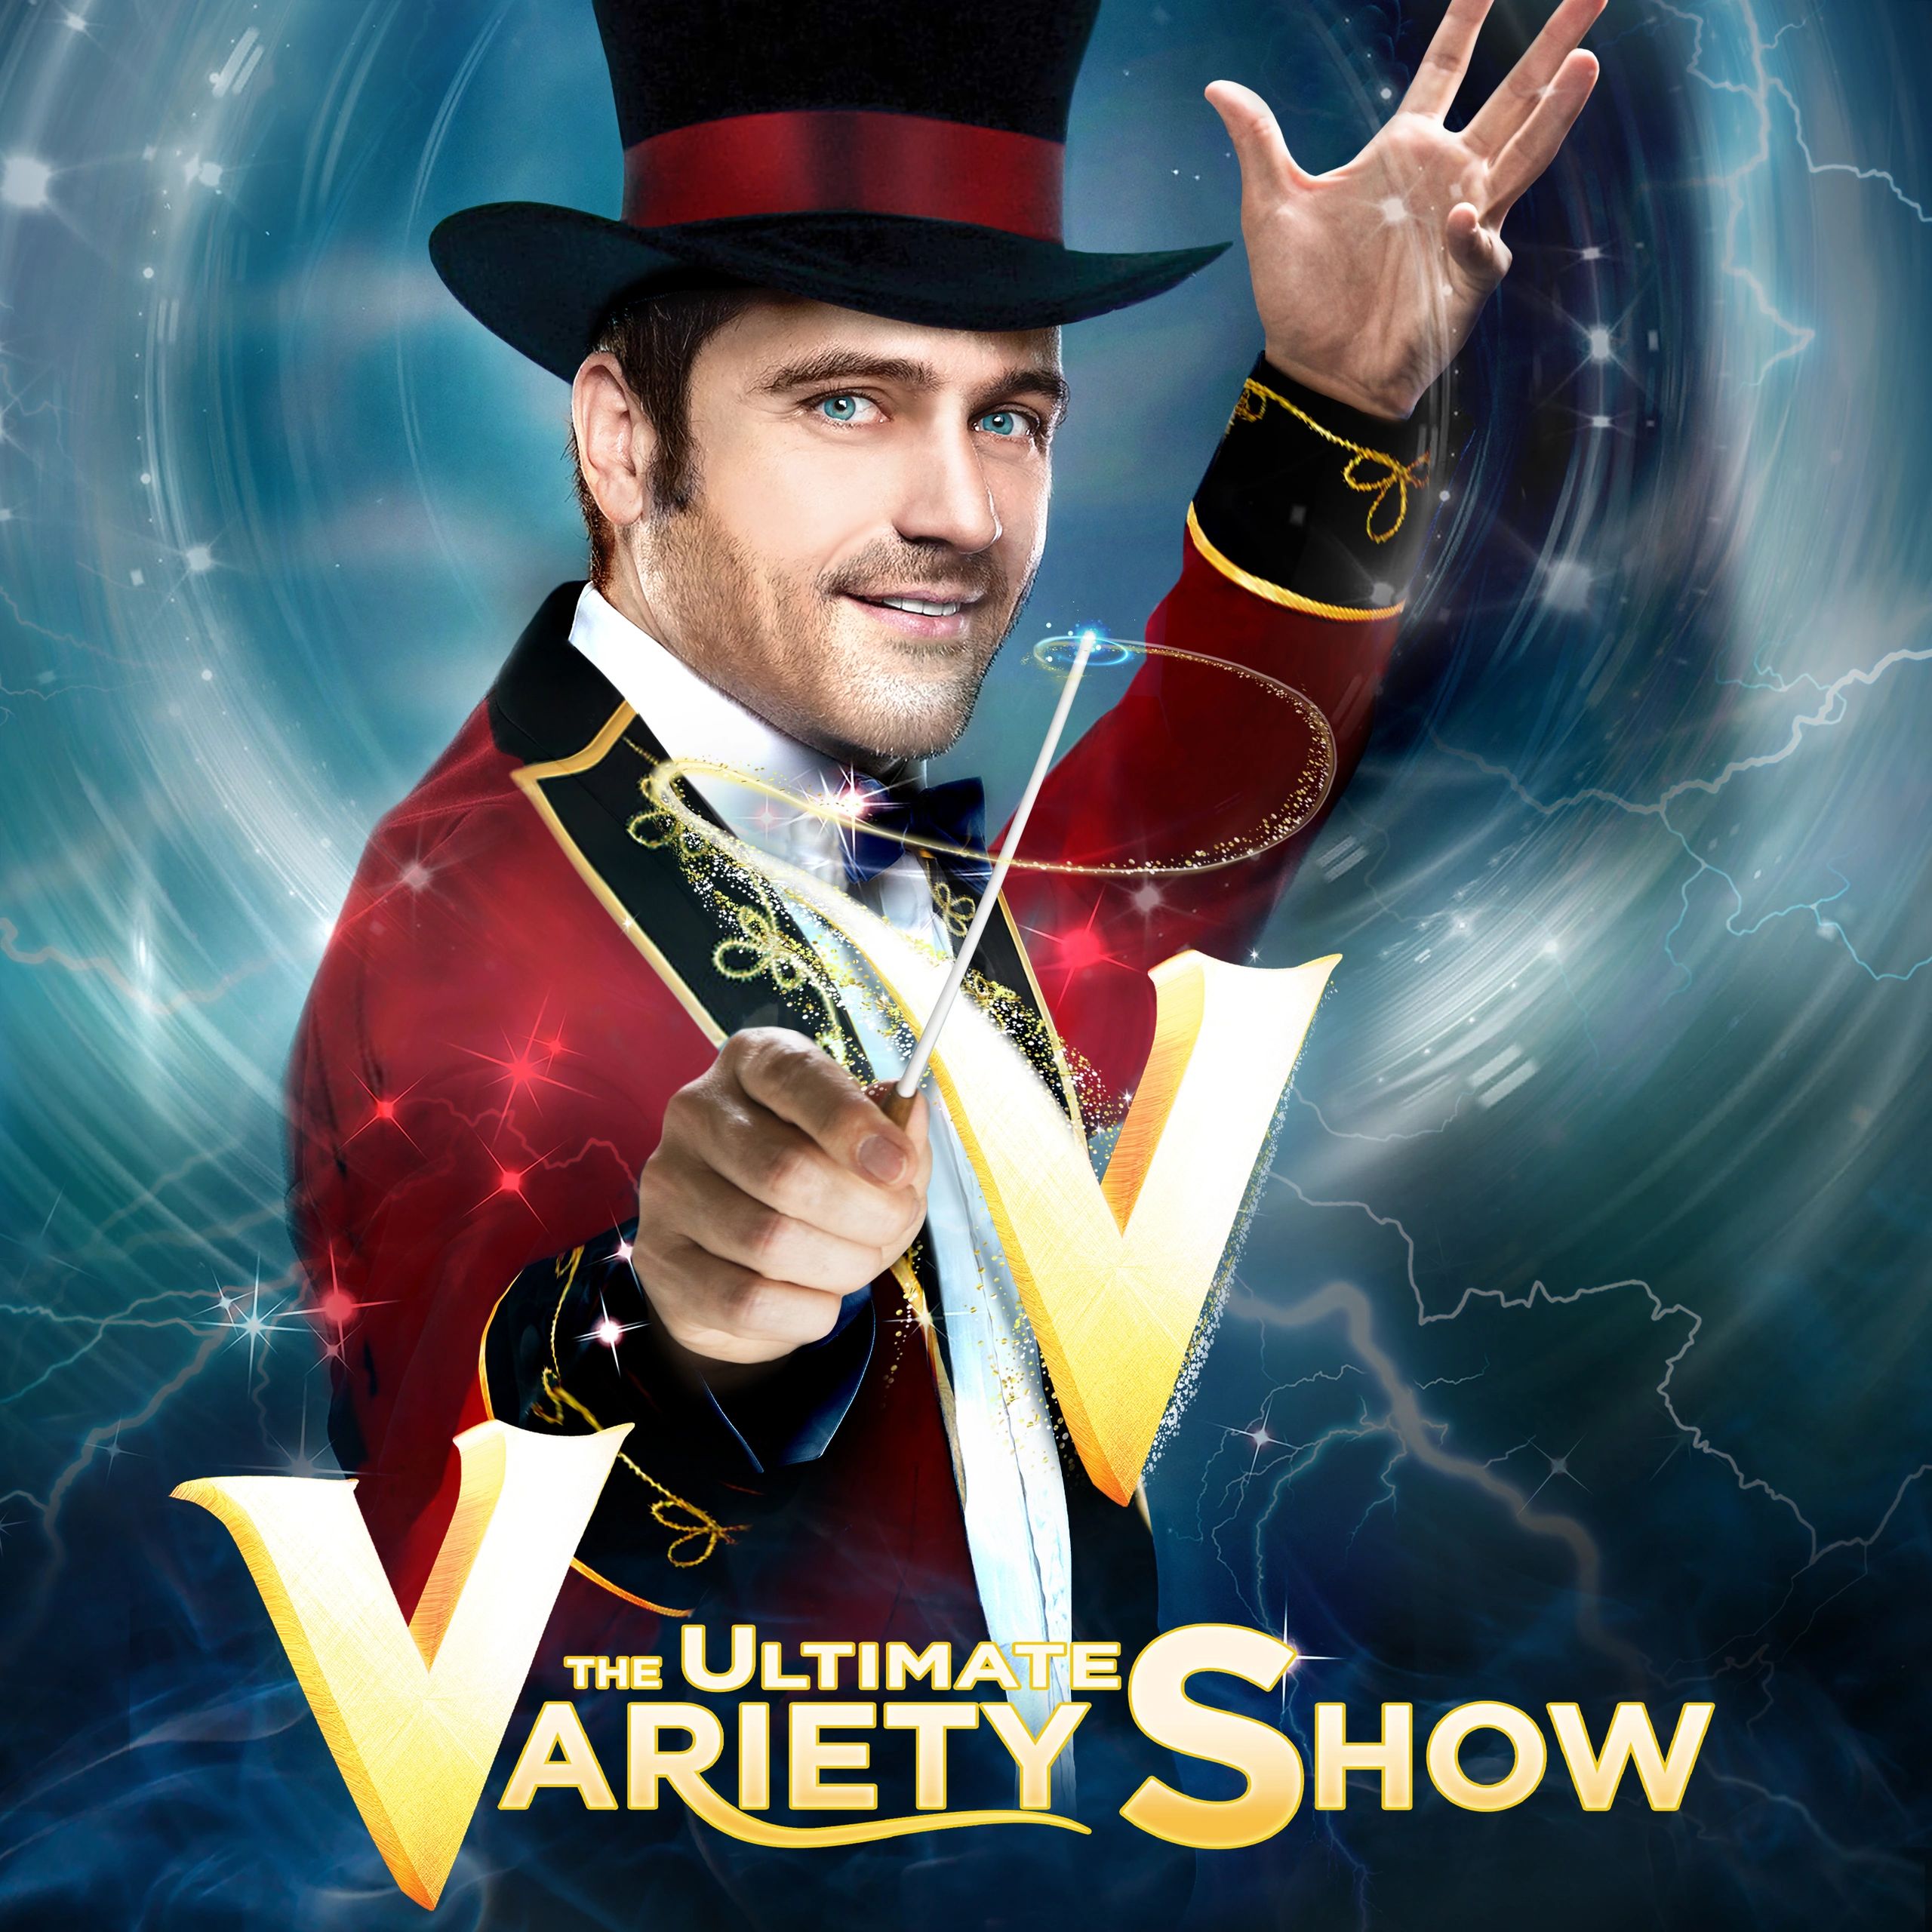 The best variety acts in the world at V - The Ultimate Variety Show